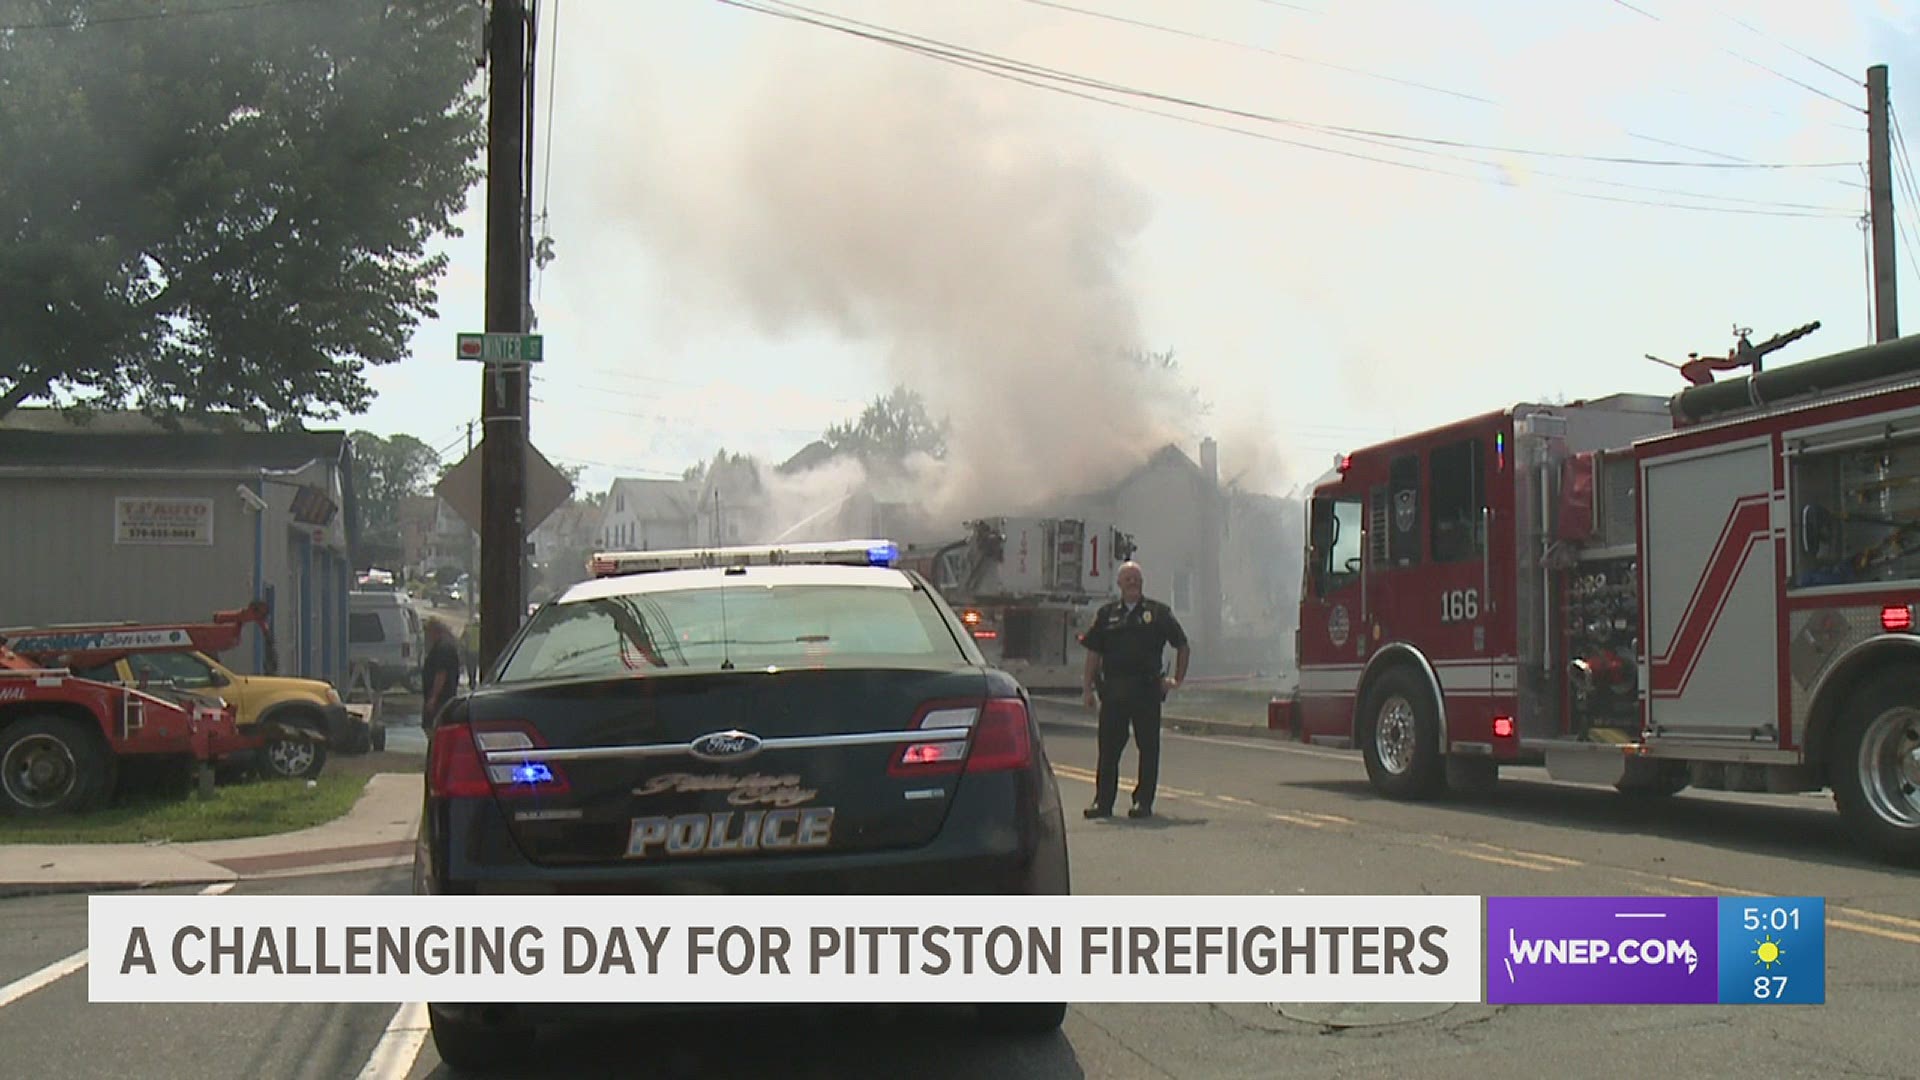 The fire started Tuesday afternoon on South Main Street in Pittston.